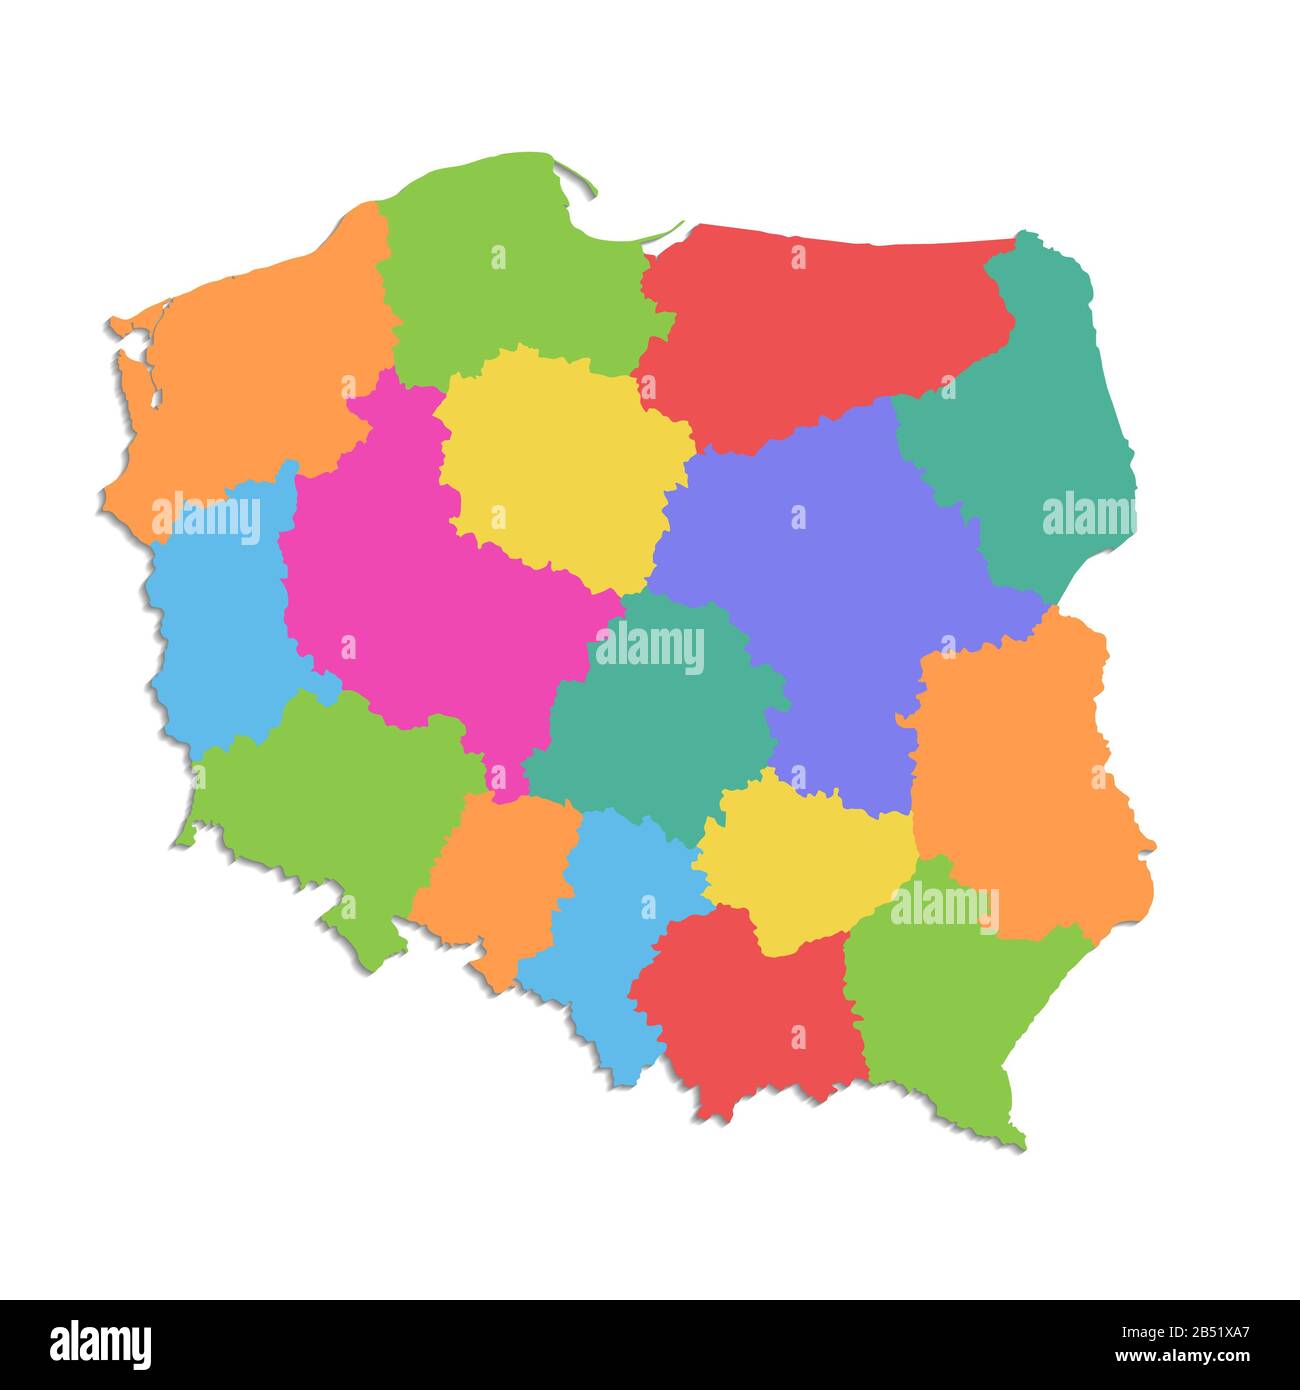 Poland map, administrative division Polish Republic, separate individual states, color map isolated on white background blank raster Stock Photo